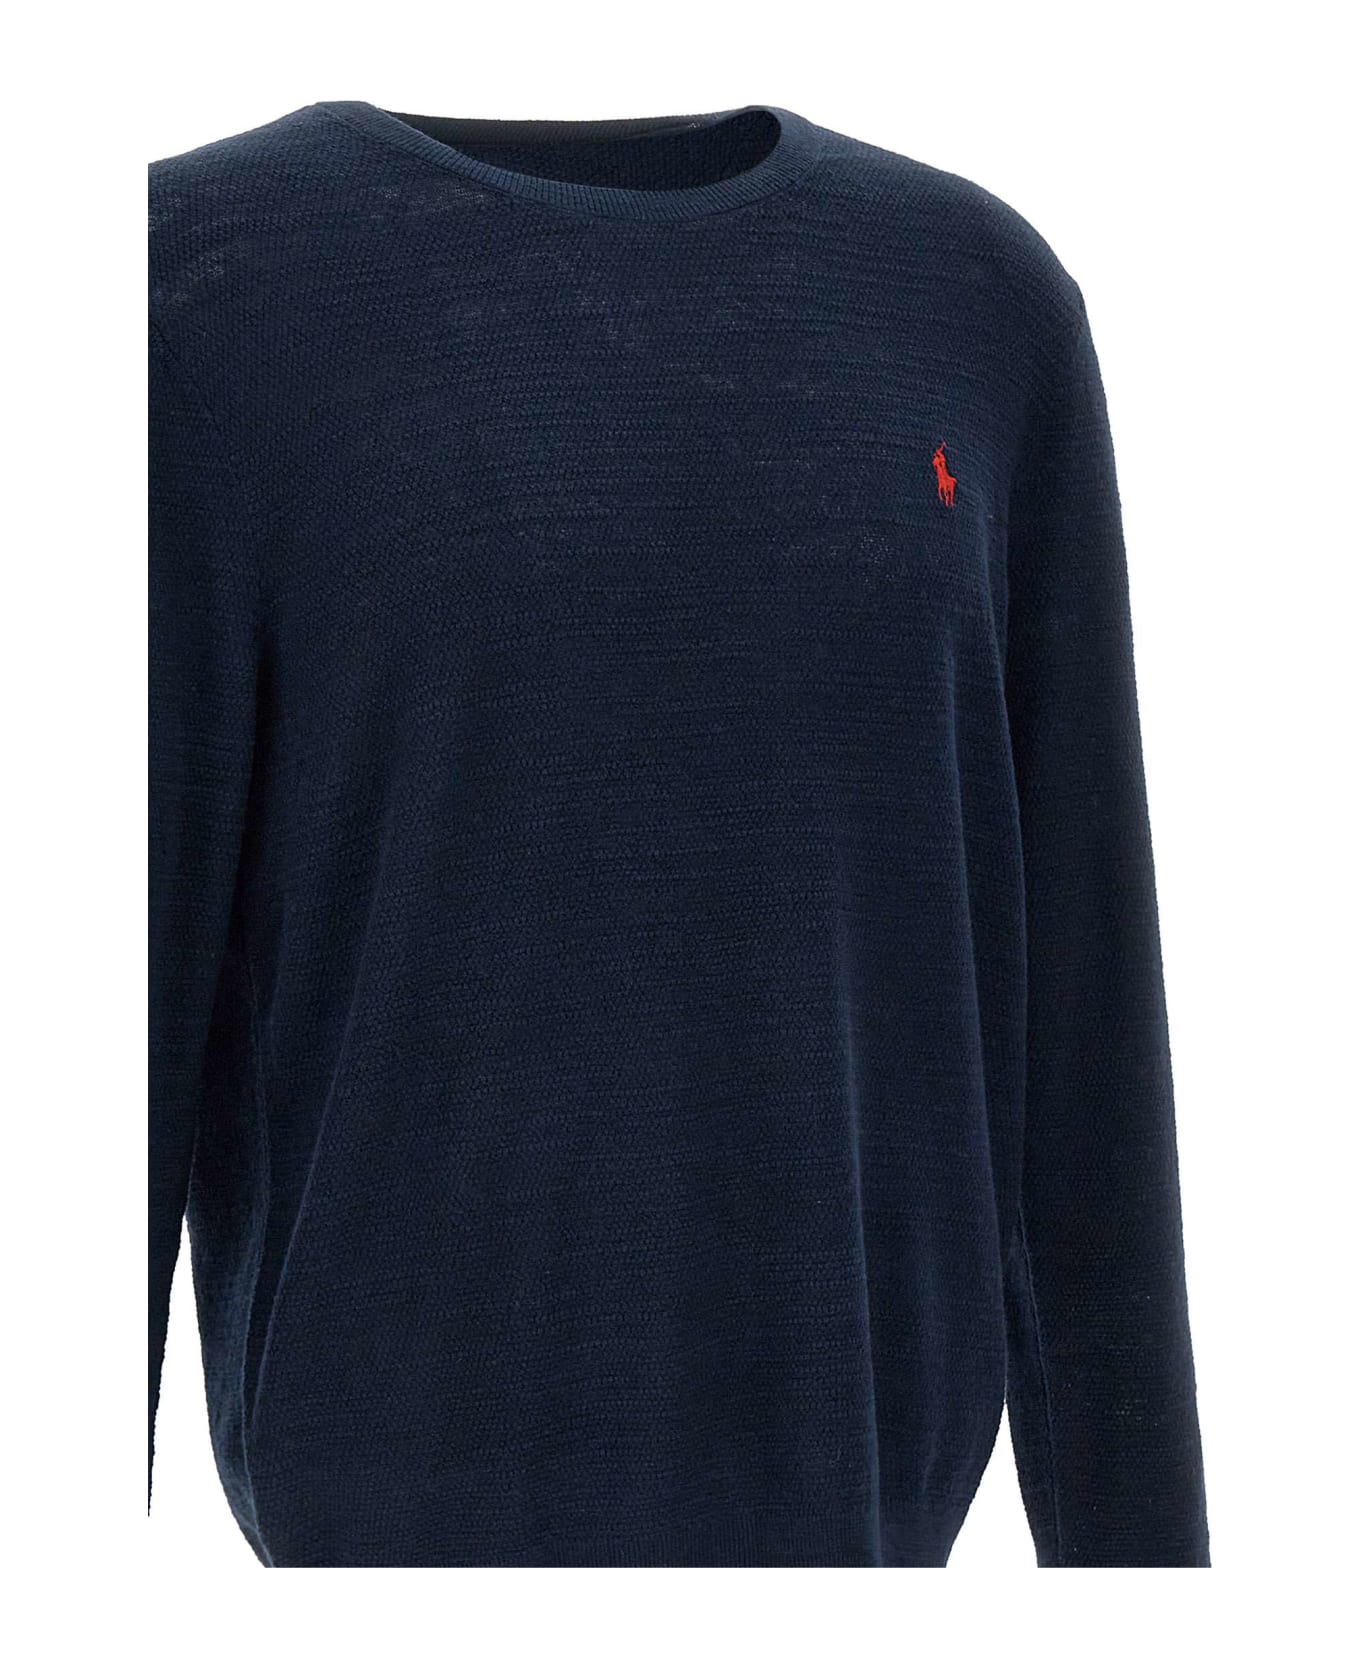 Polo Ralph Lauren 'classic' Linen And Cotton Pullover Sweater - BRIGHT NAVY W/RED